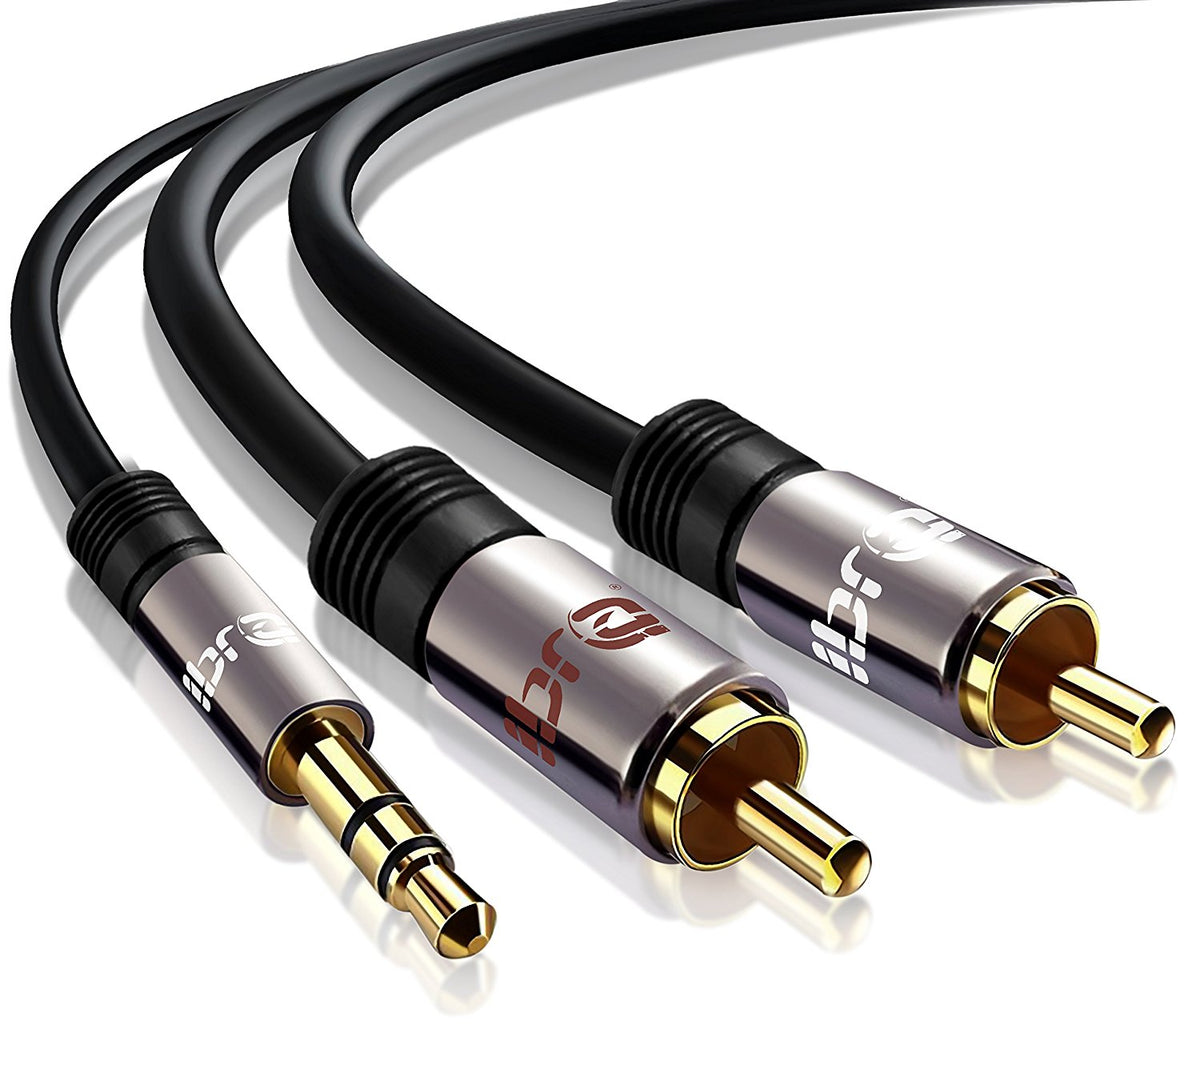 Premium 3.5mm Stereo Jack to 2 RCA Phono Plugs Audio Cable Lead GOLD 15m - IBRA